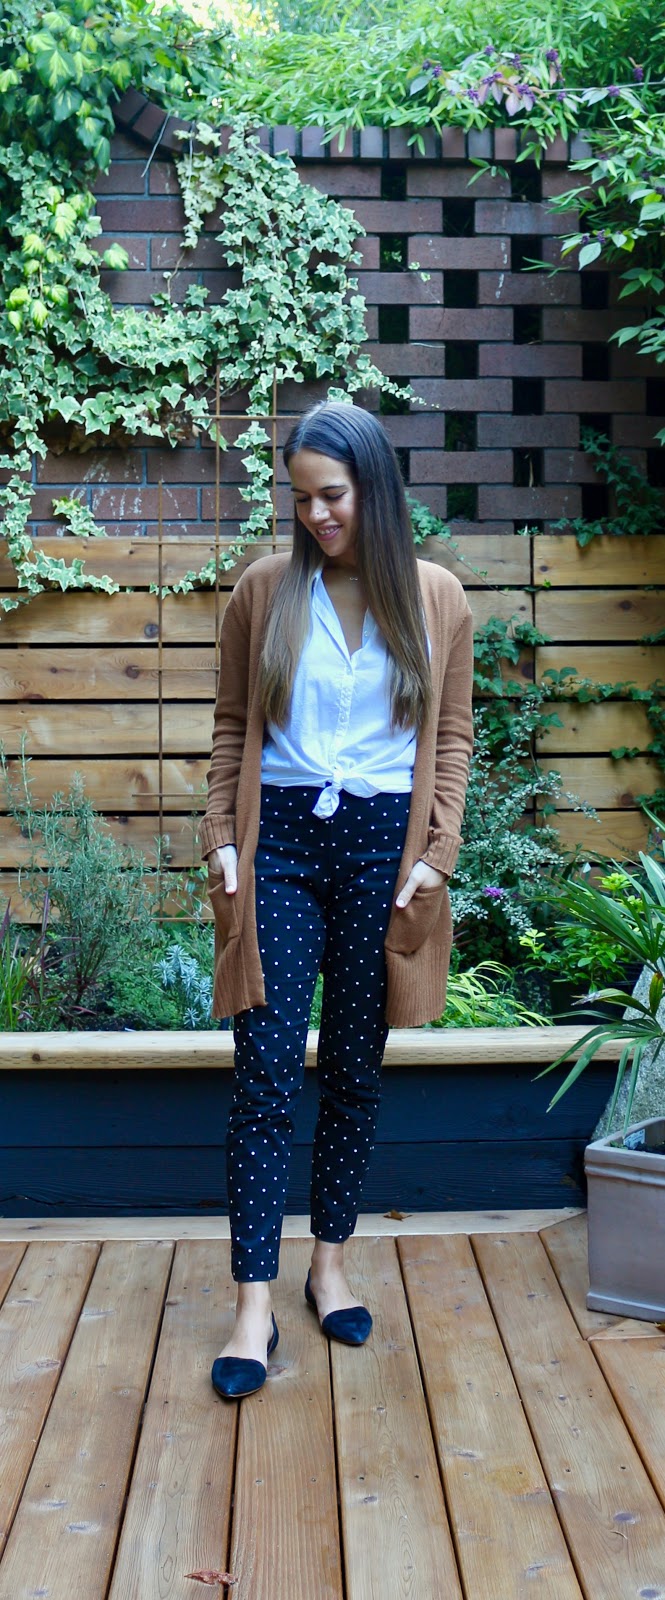 Jules in Flats - Old Navy High Waisted Pixie Polka Dot Pants (Business Casual Workwear on a Budget)